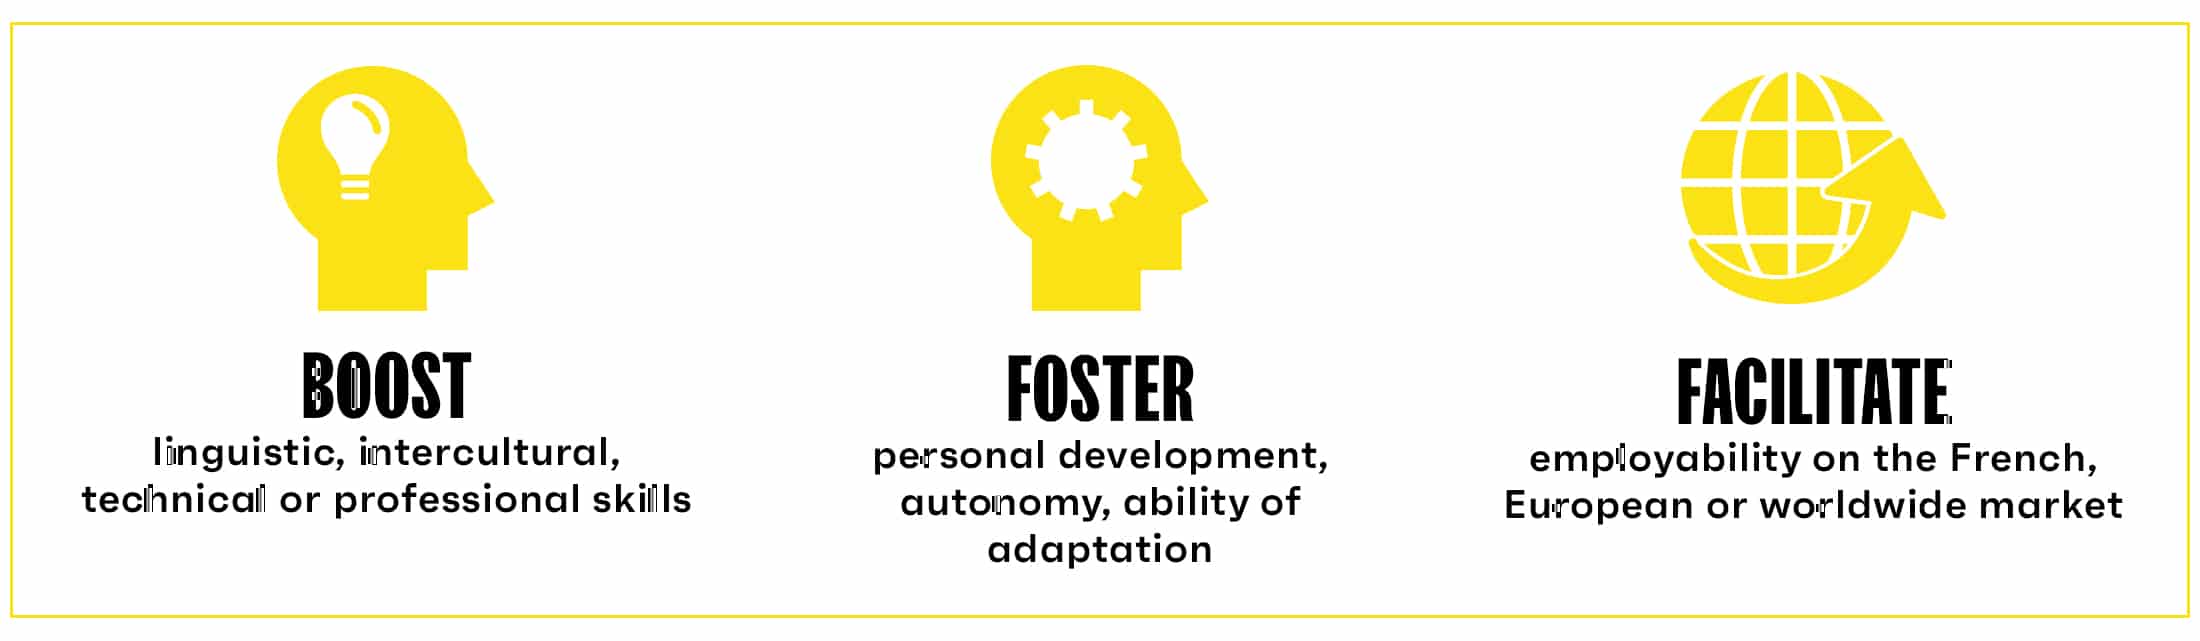 Boost linguistic, intercultural, technical or professionnal skills 
Foster personal development, autonomy, ability of adaptation
Facilitate employability on the french, european or wordlwide market